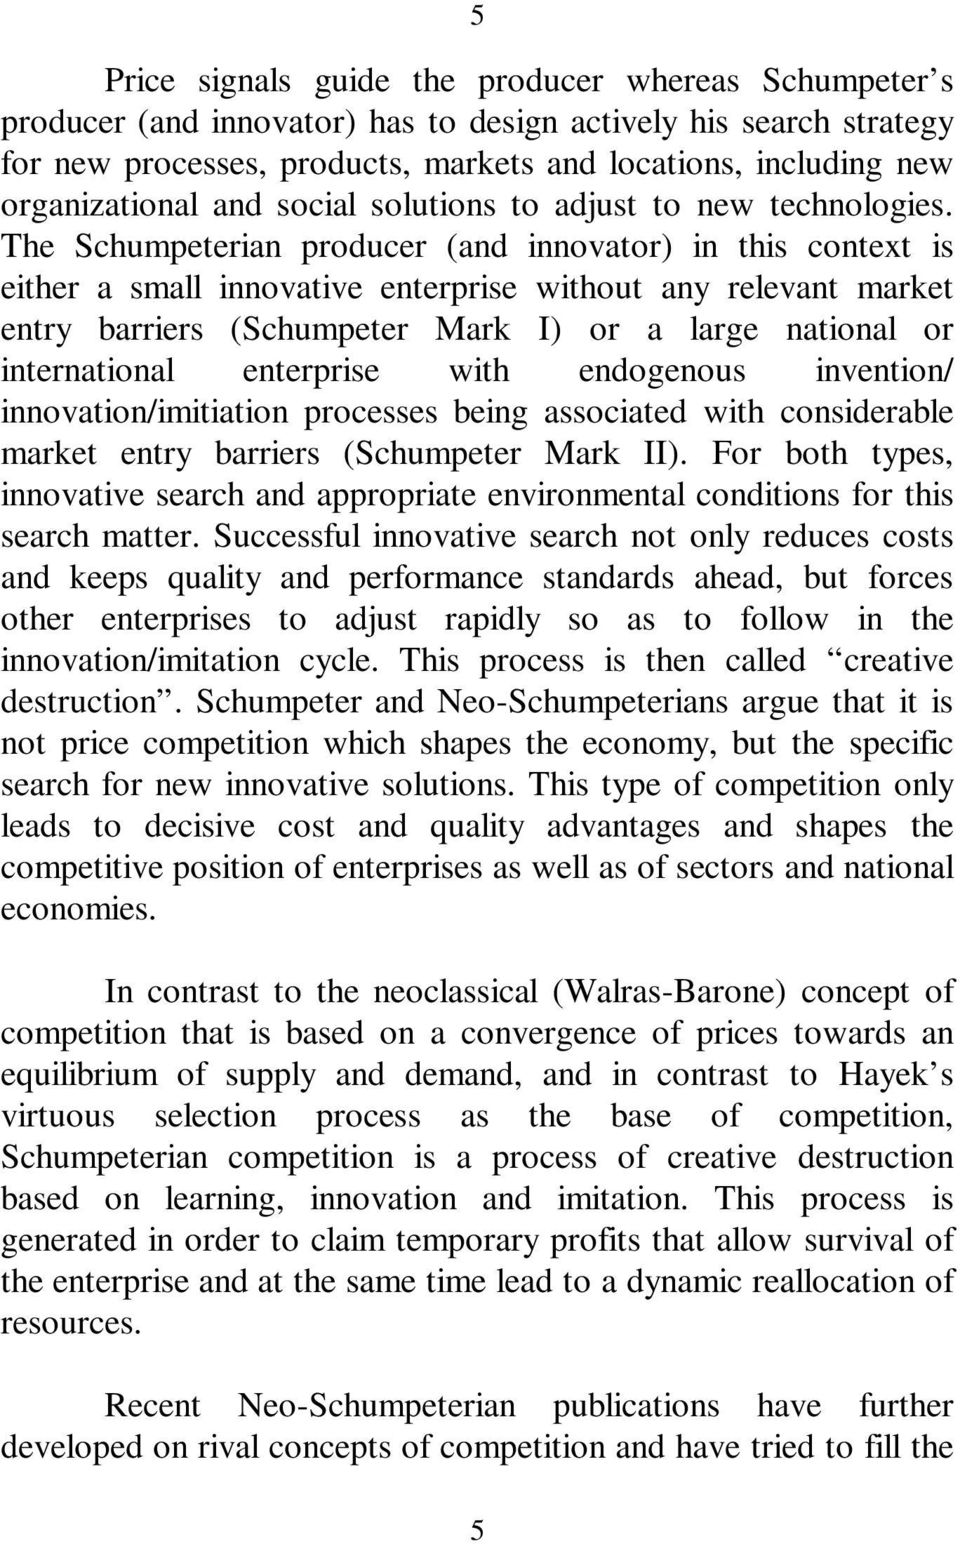 The Schumpeterian producer (and innovator) in this context is either a small innovative enterprise without any relevant market entry barriers (Schumpeter Mark I) or a large national or international